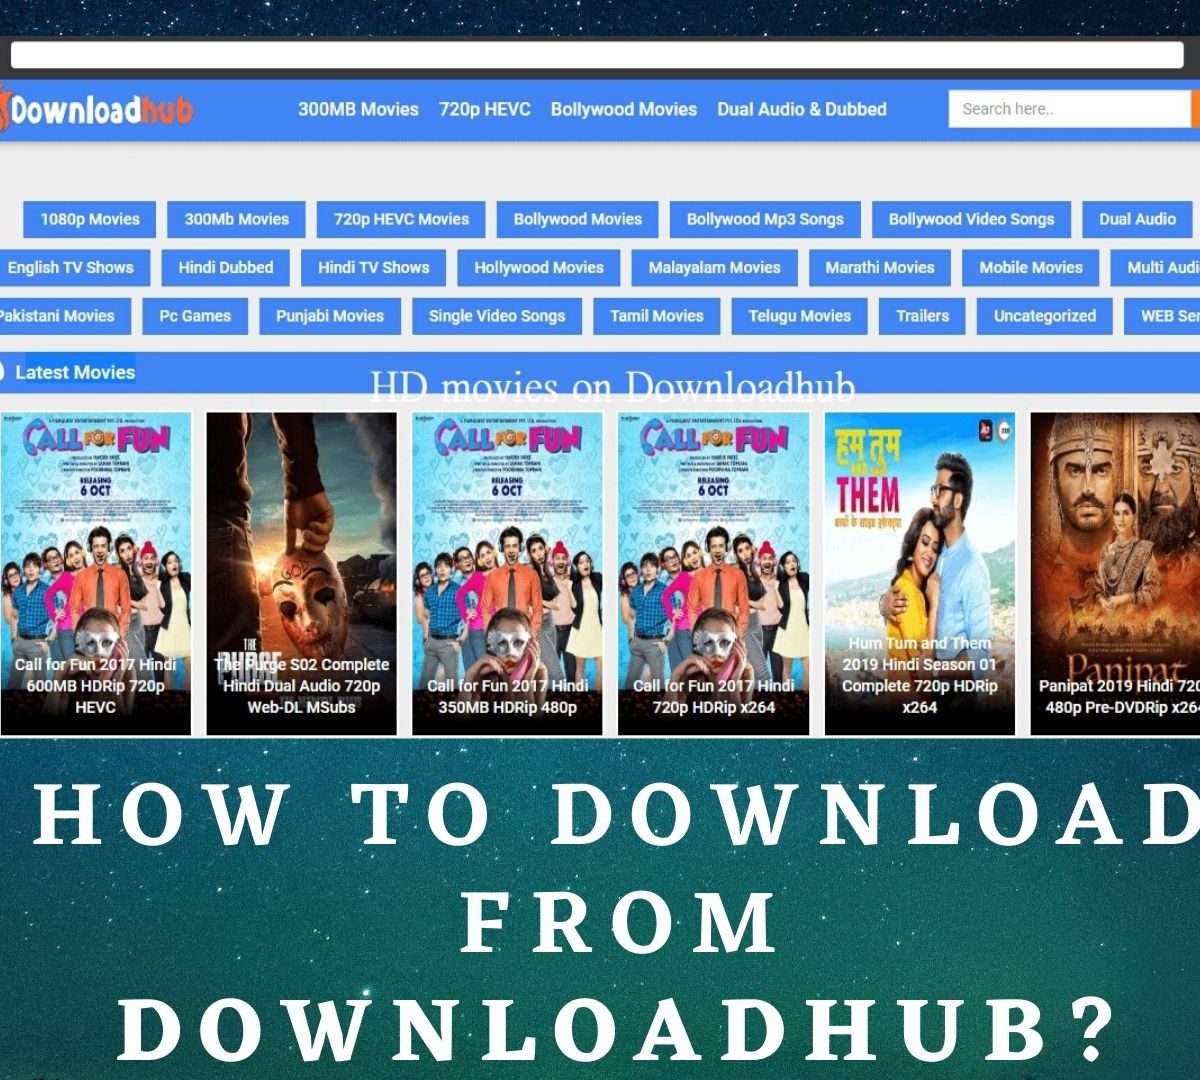 How to download from DownloadHub?